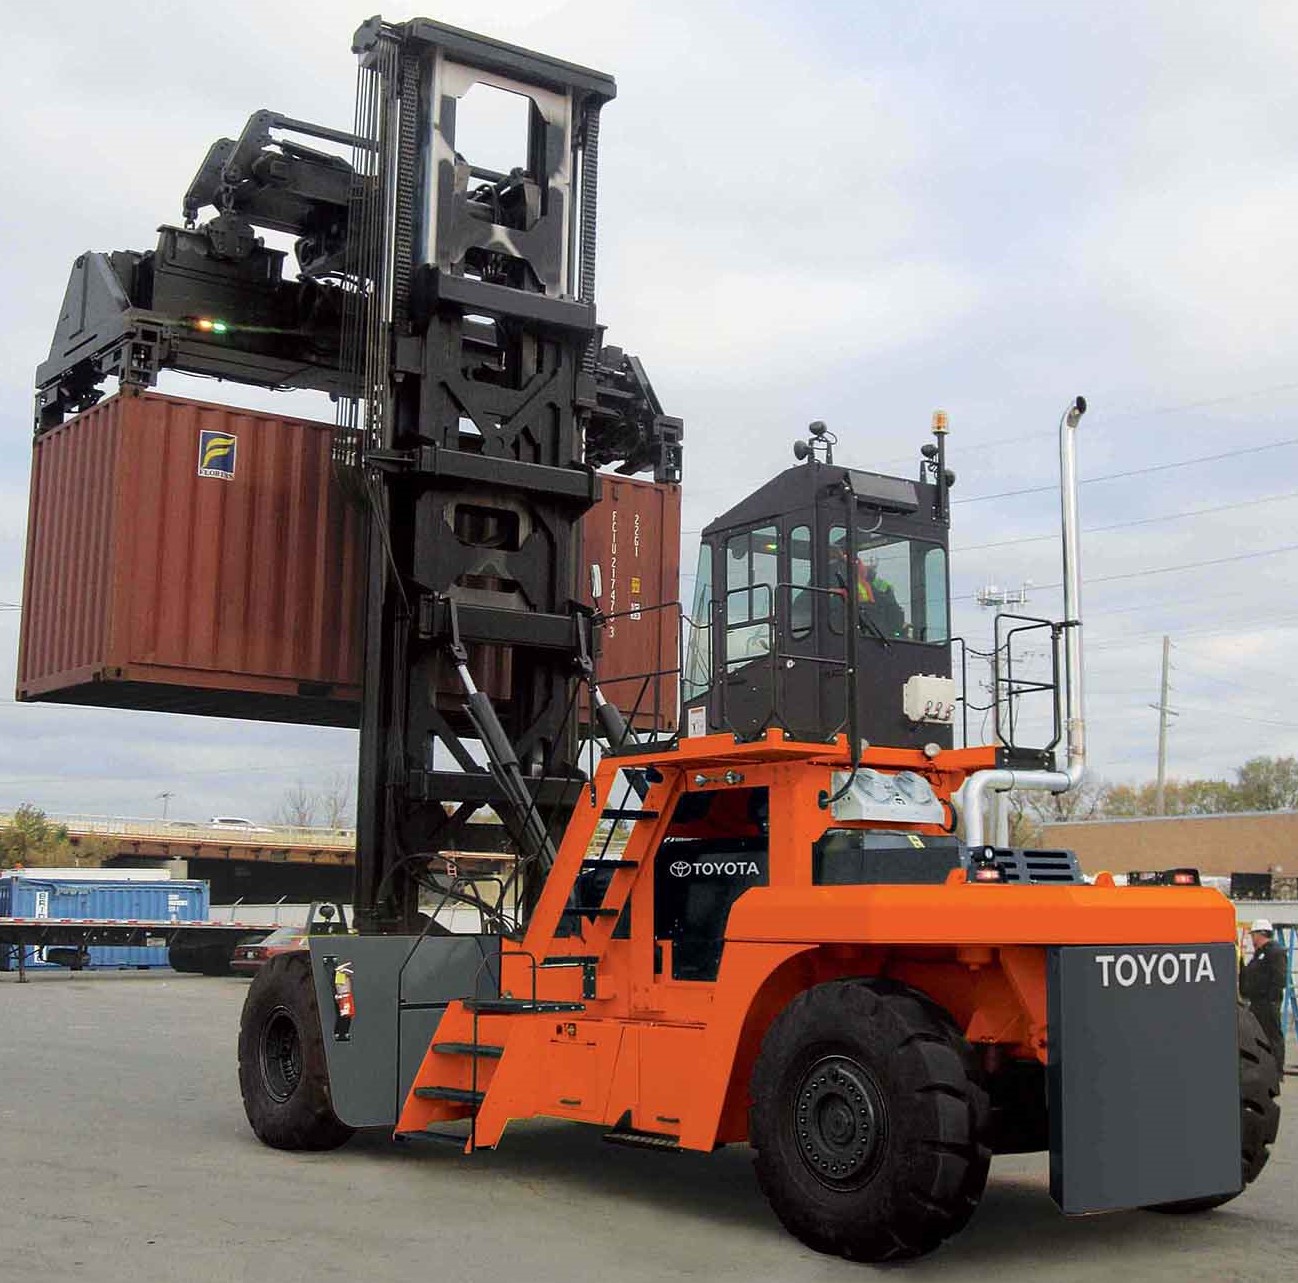 Toyota Forklift Container Handler